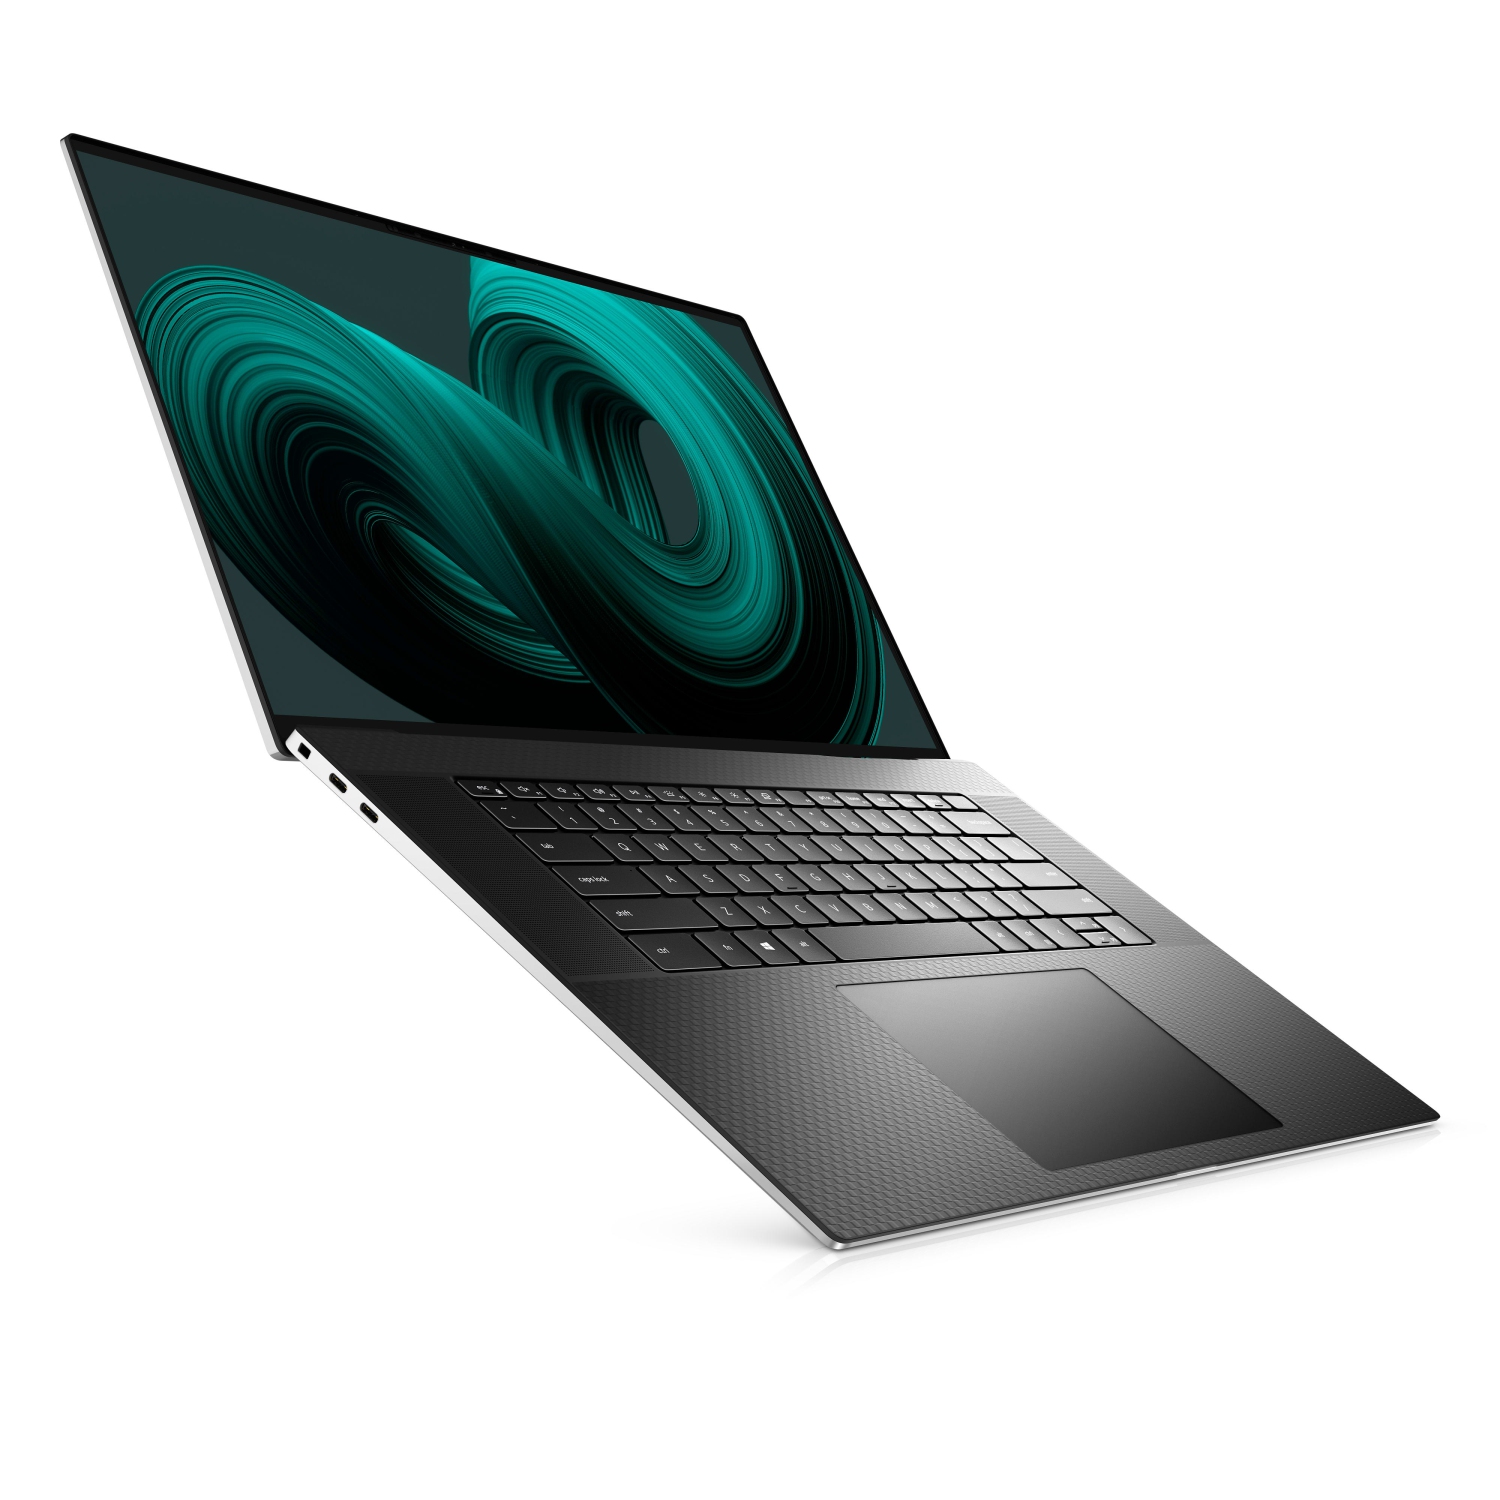 Refurbished (Excellent) - Dell XPS 17 9710 Laptop (2021) | 17" 4K Touch | Core i9 - 1TB SSD - 64GB RAM - RTX 3060 | 8 Cores @ 4.9 GHz - 11th Gen CPU Certified Refurbished